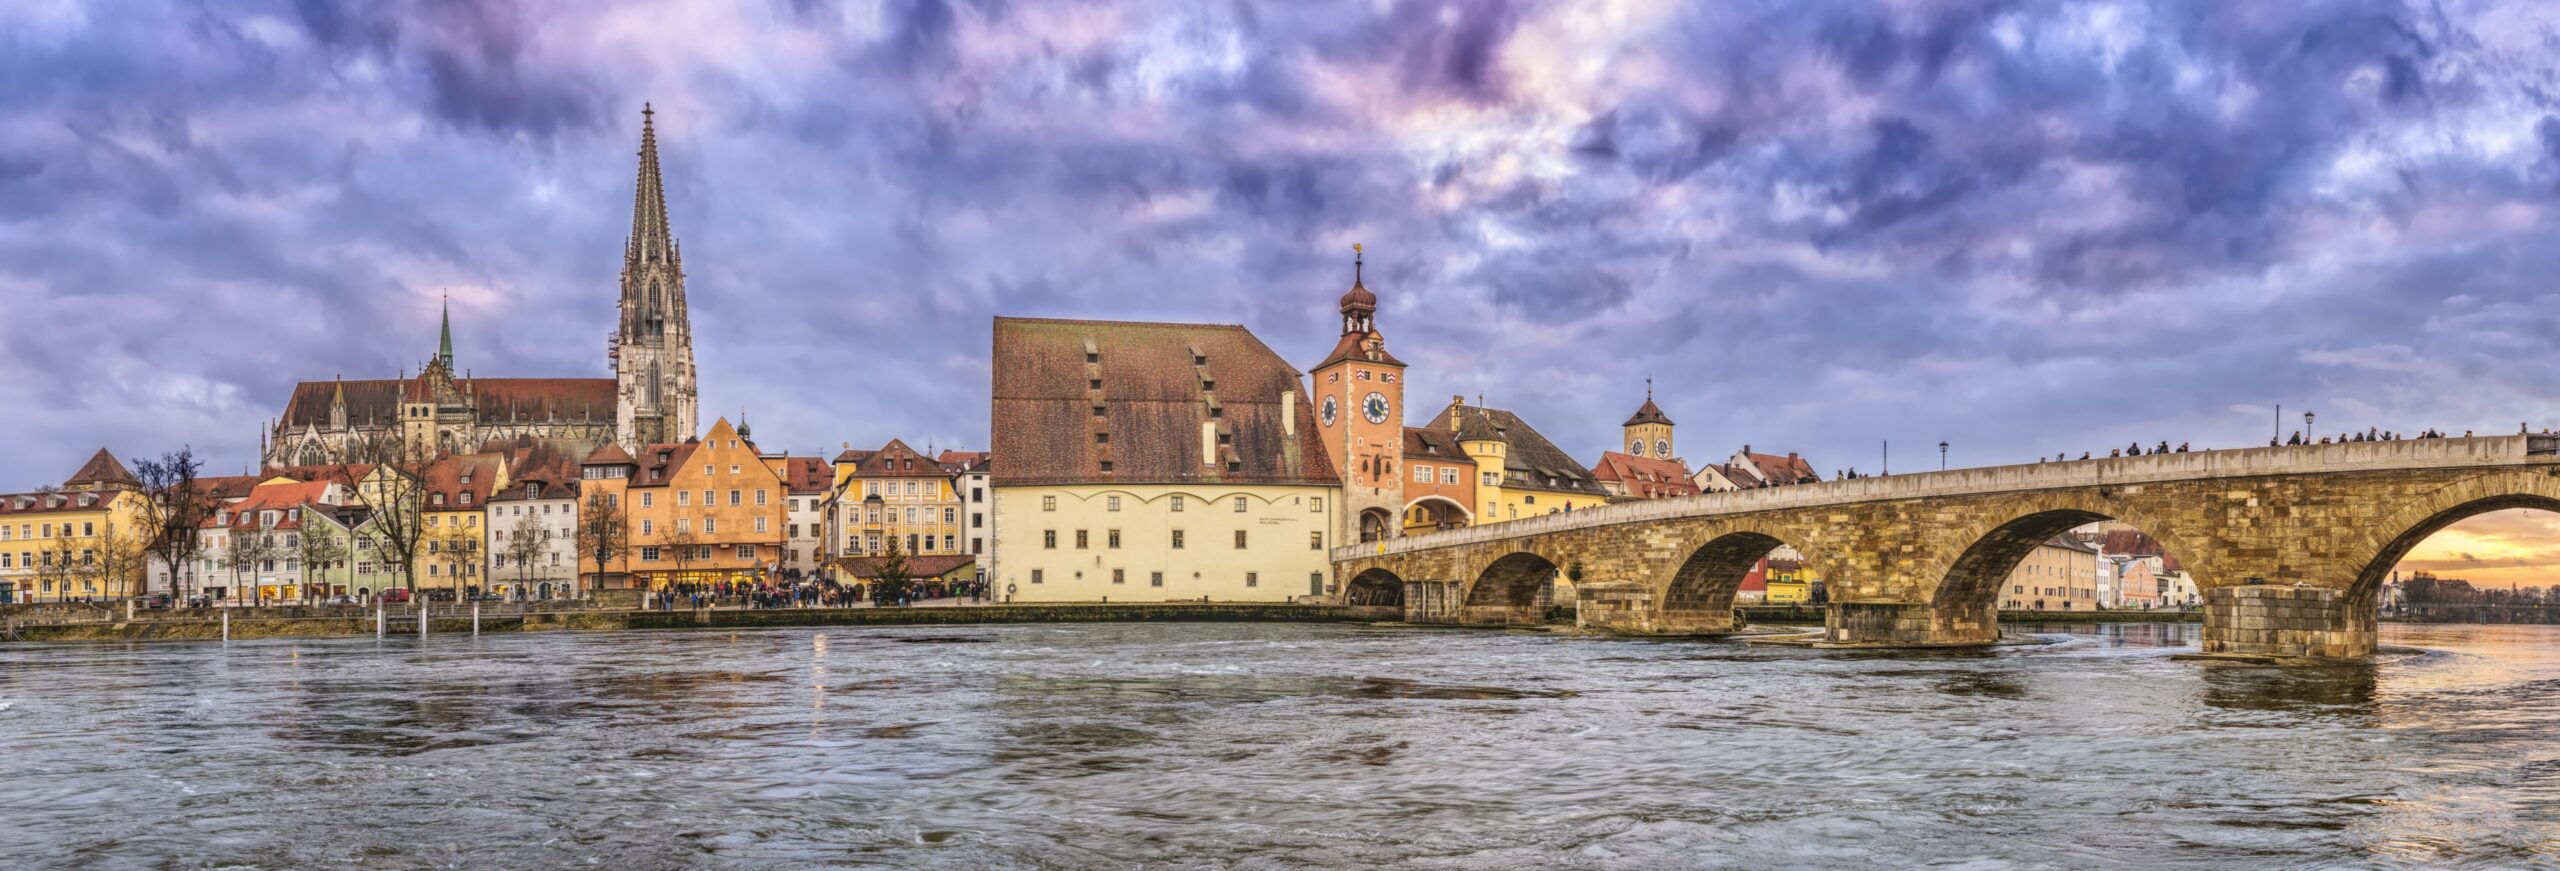 Regensburg bridge cathedral k wallpapers and